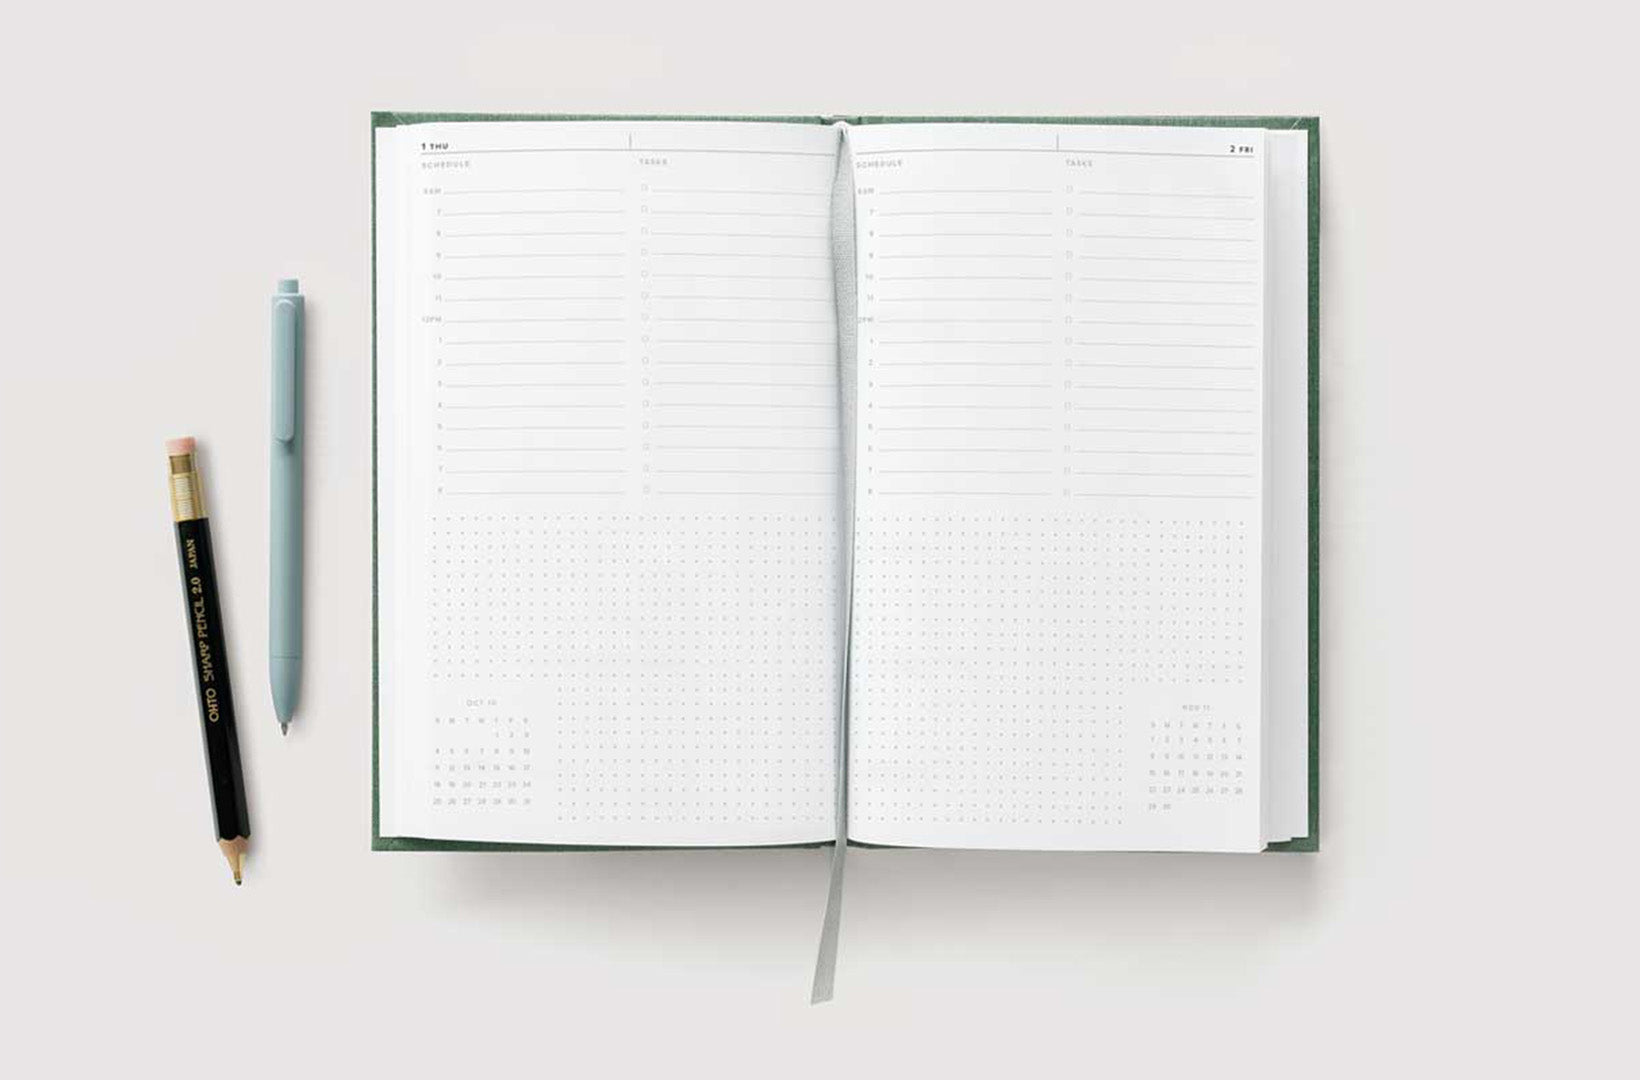 A 23-24 Hardcover Daily Planner lies open against a light gray background. Two writing tools sit aside.